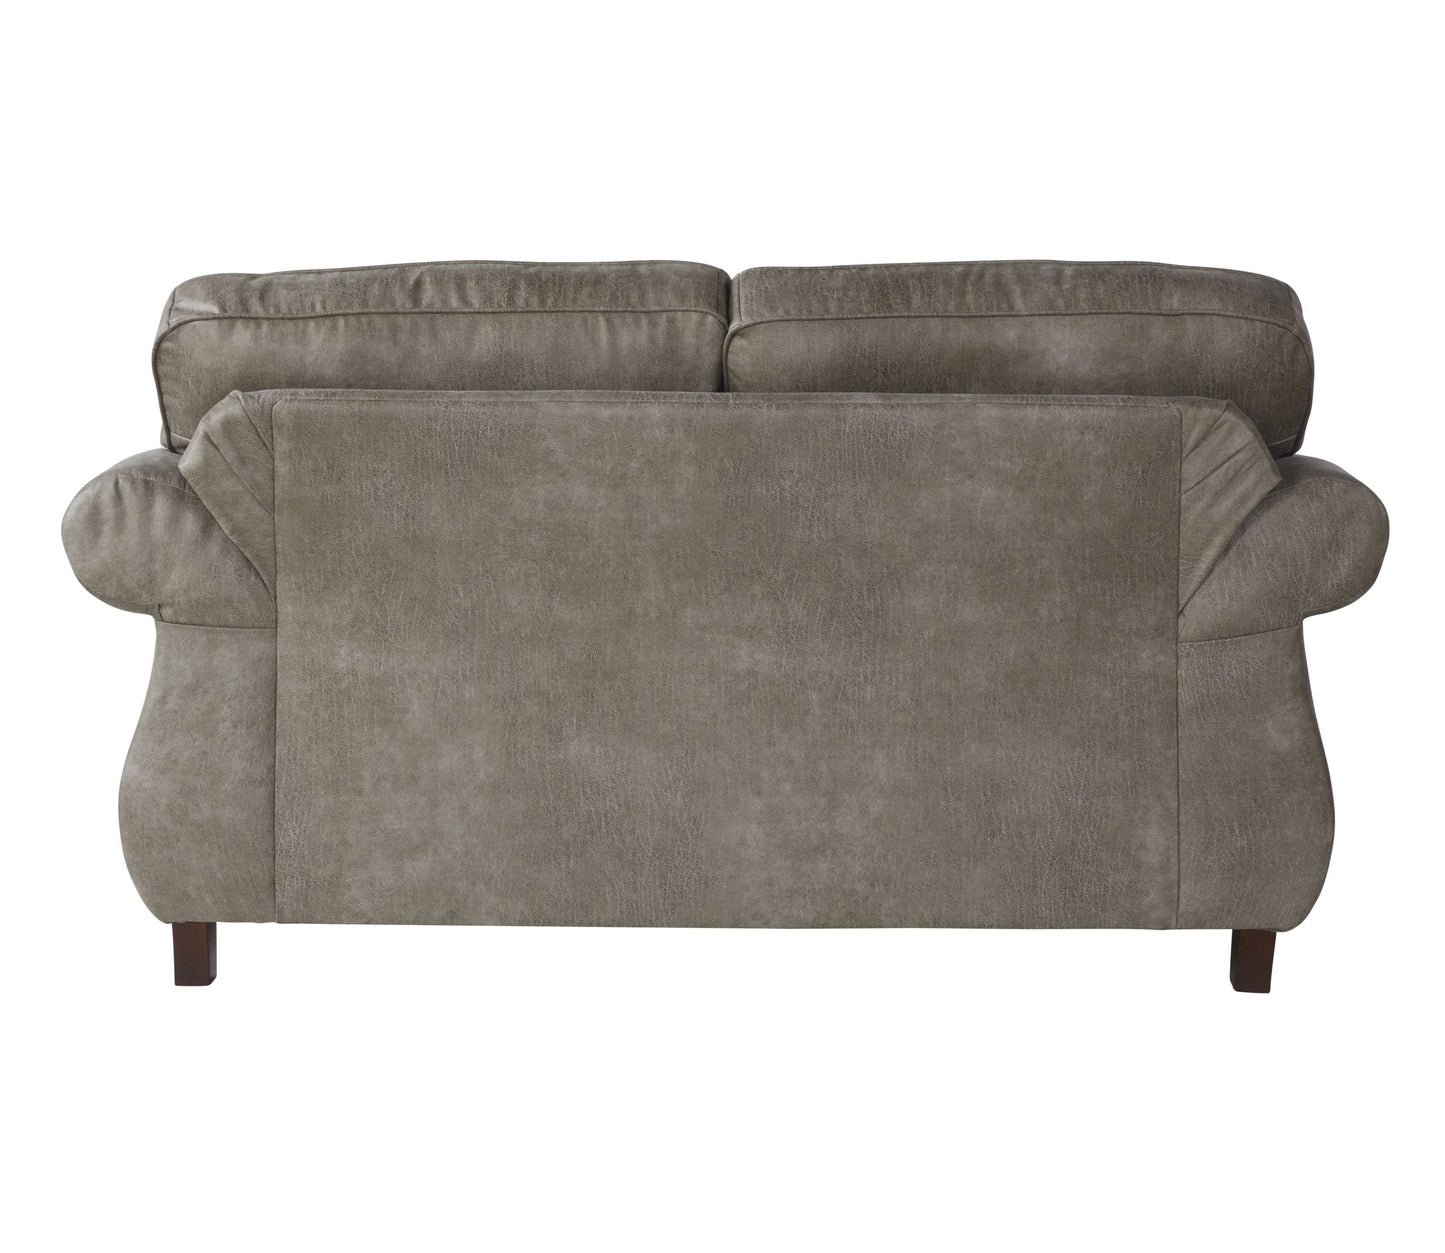 Leinster Faux Leather Upholstered Nailhead Loveseat in Stone Gray